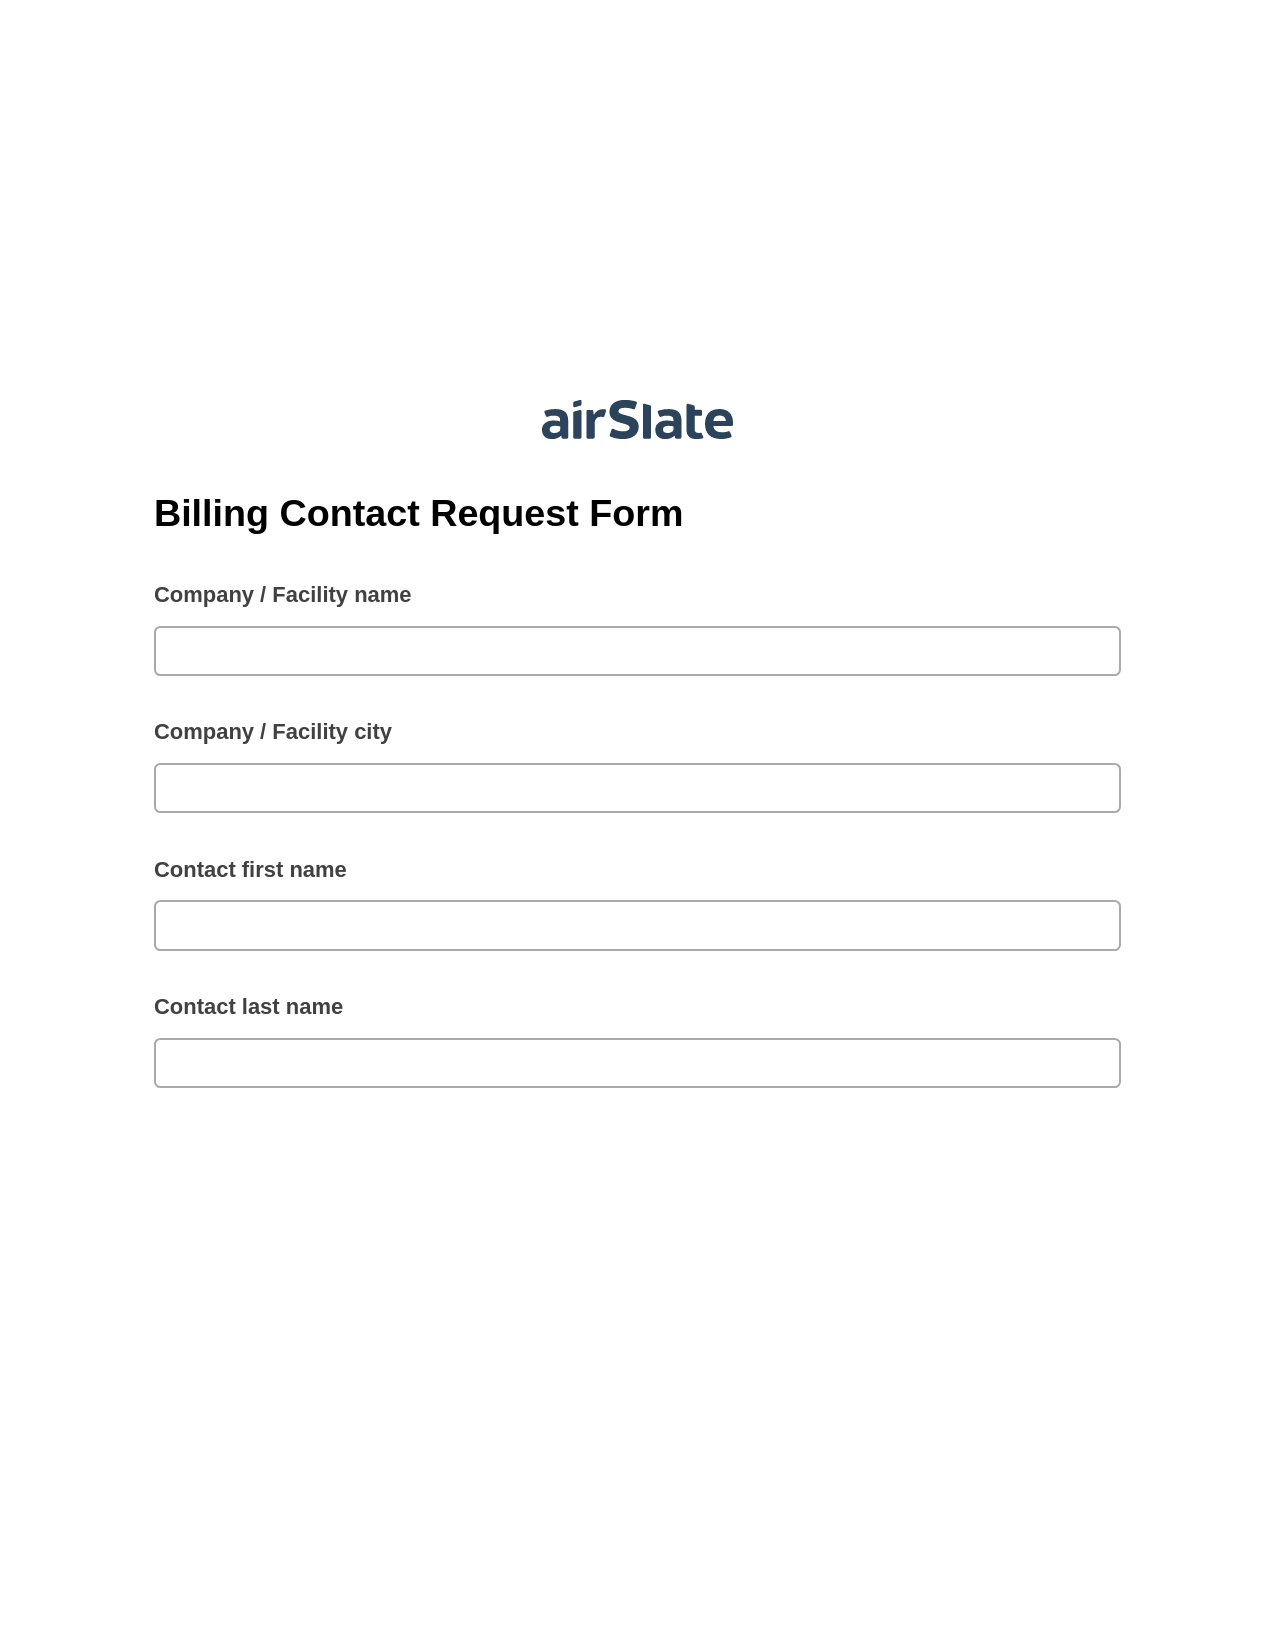 Multirole Billing Contact Request Form Pre-fill from CSV File Bot, Audit Trail Bot, Box Bot